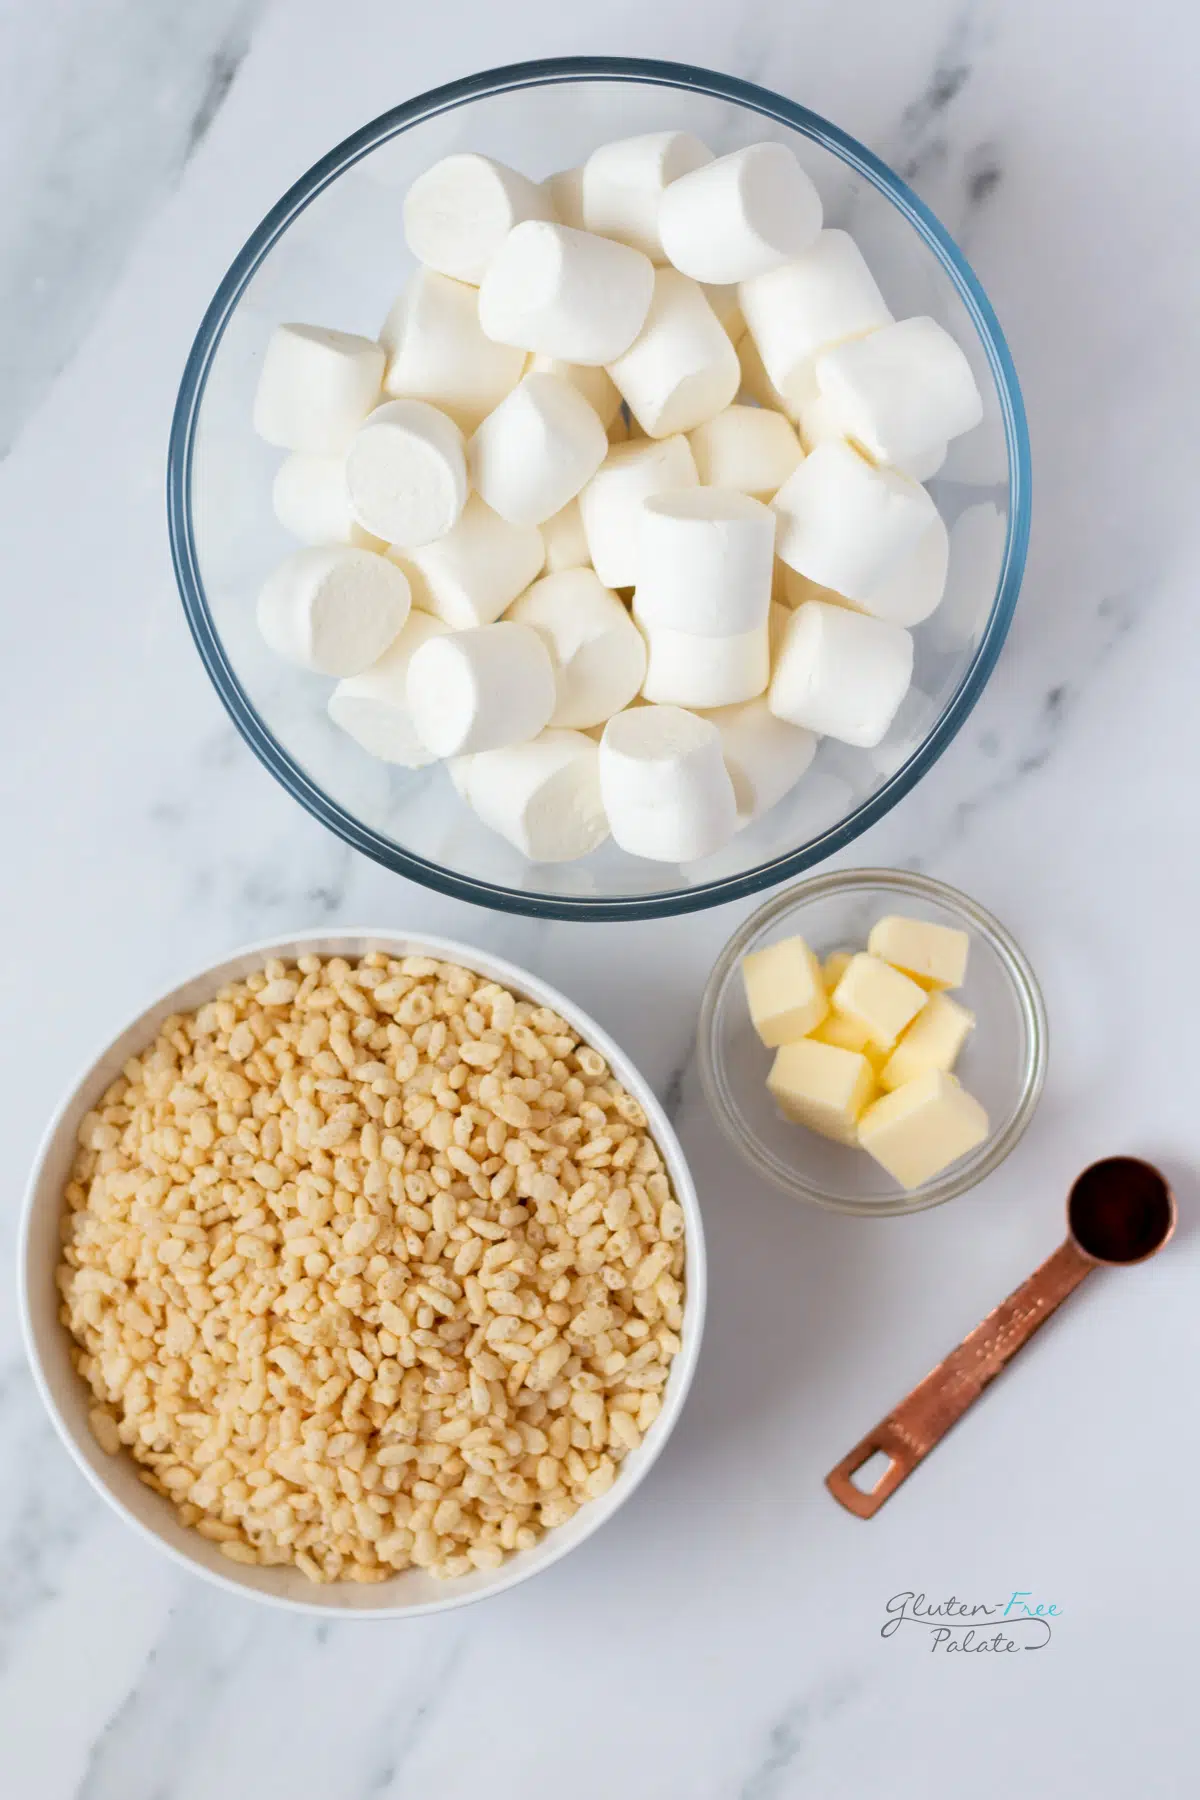 marshmallows, crispy rice cereal, butter and vanilla